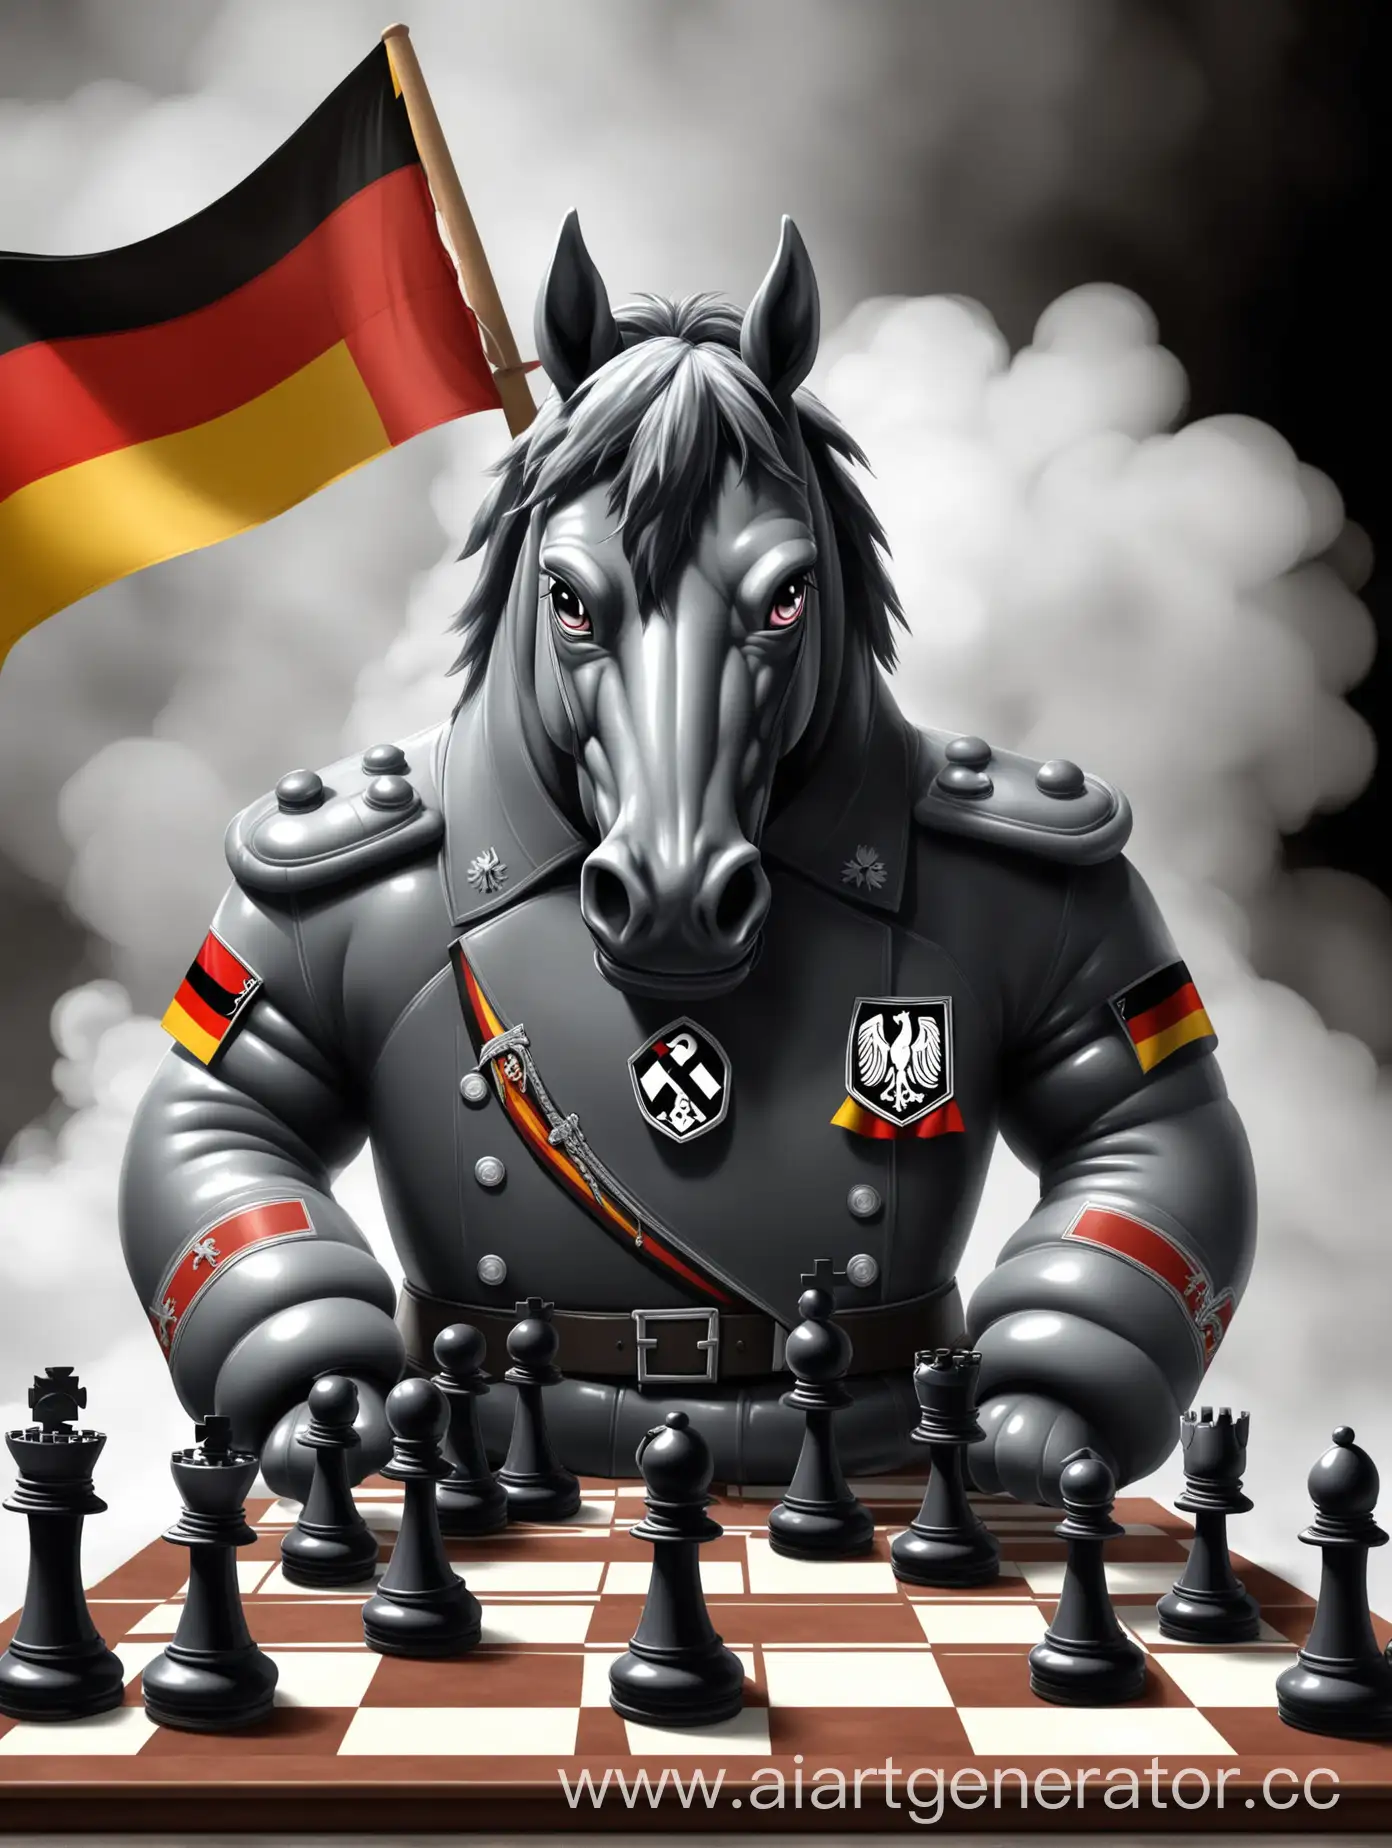 German-Inflated-Gigachad-Furry-Soldier-Chess-Horse-Breathing-Smoke